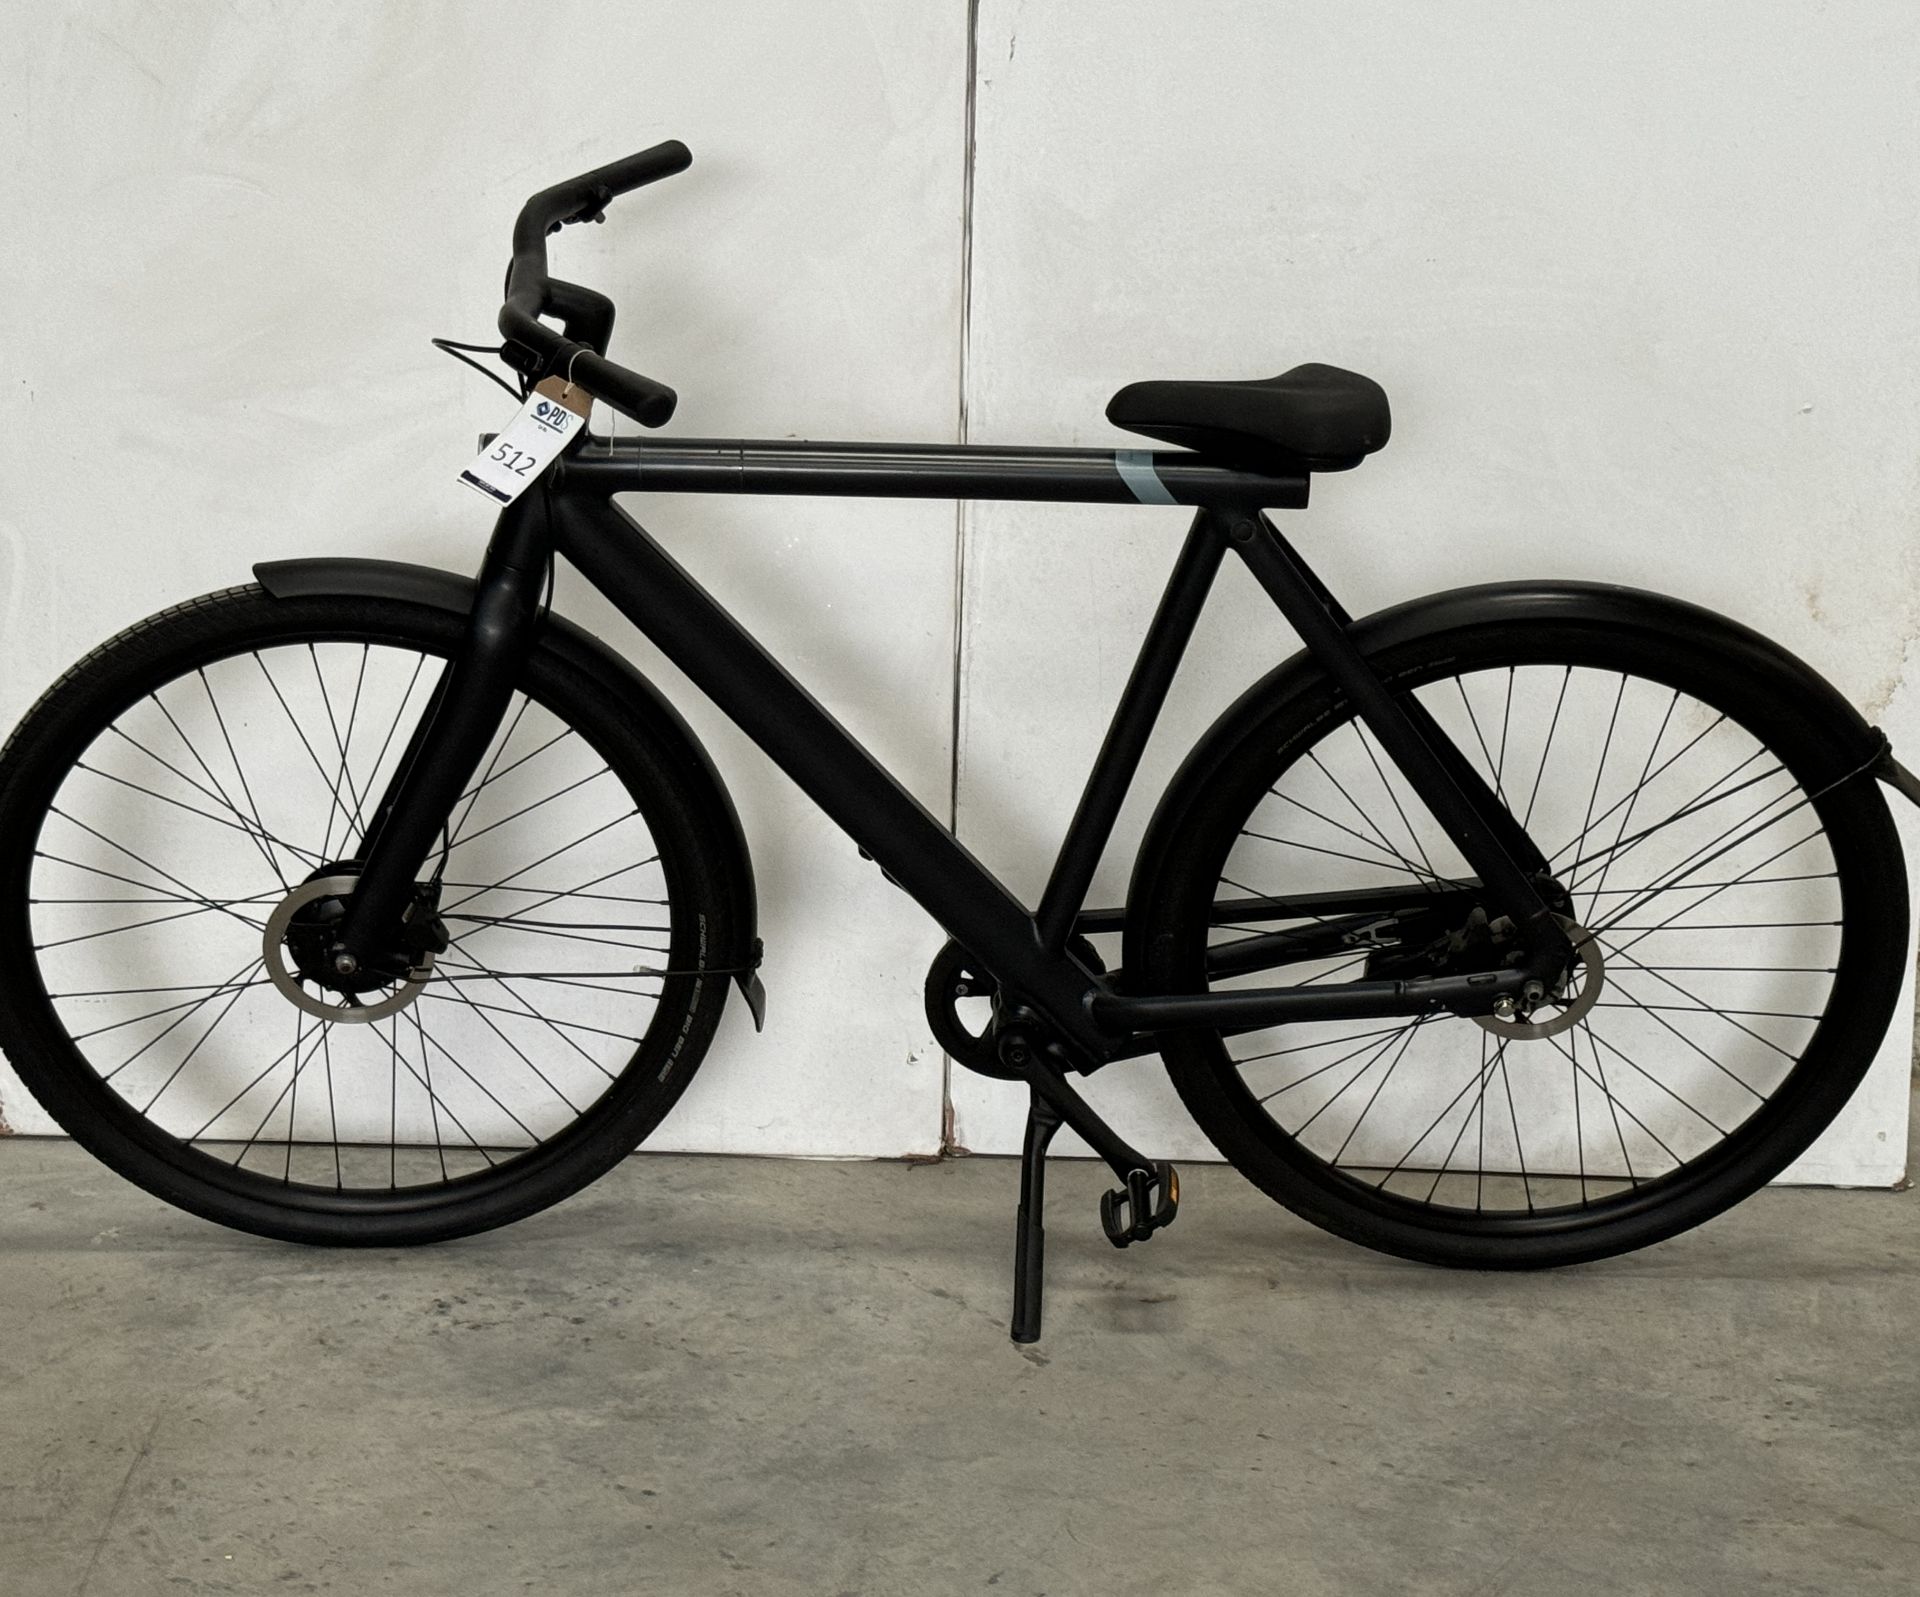 VanMoof S3 Electric Bike, Frame Number ASY1043531 (NOT ROADWORTHY - FOR SPARES ONLY) (No codes